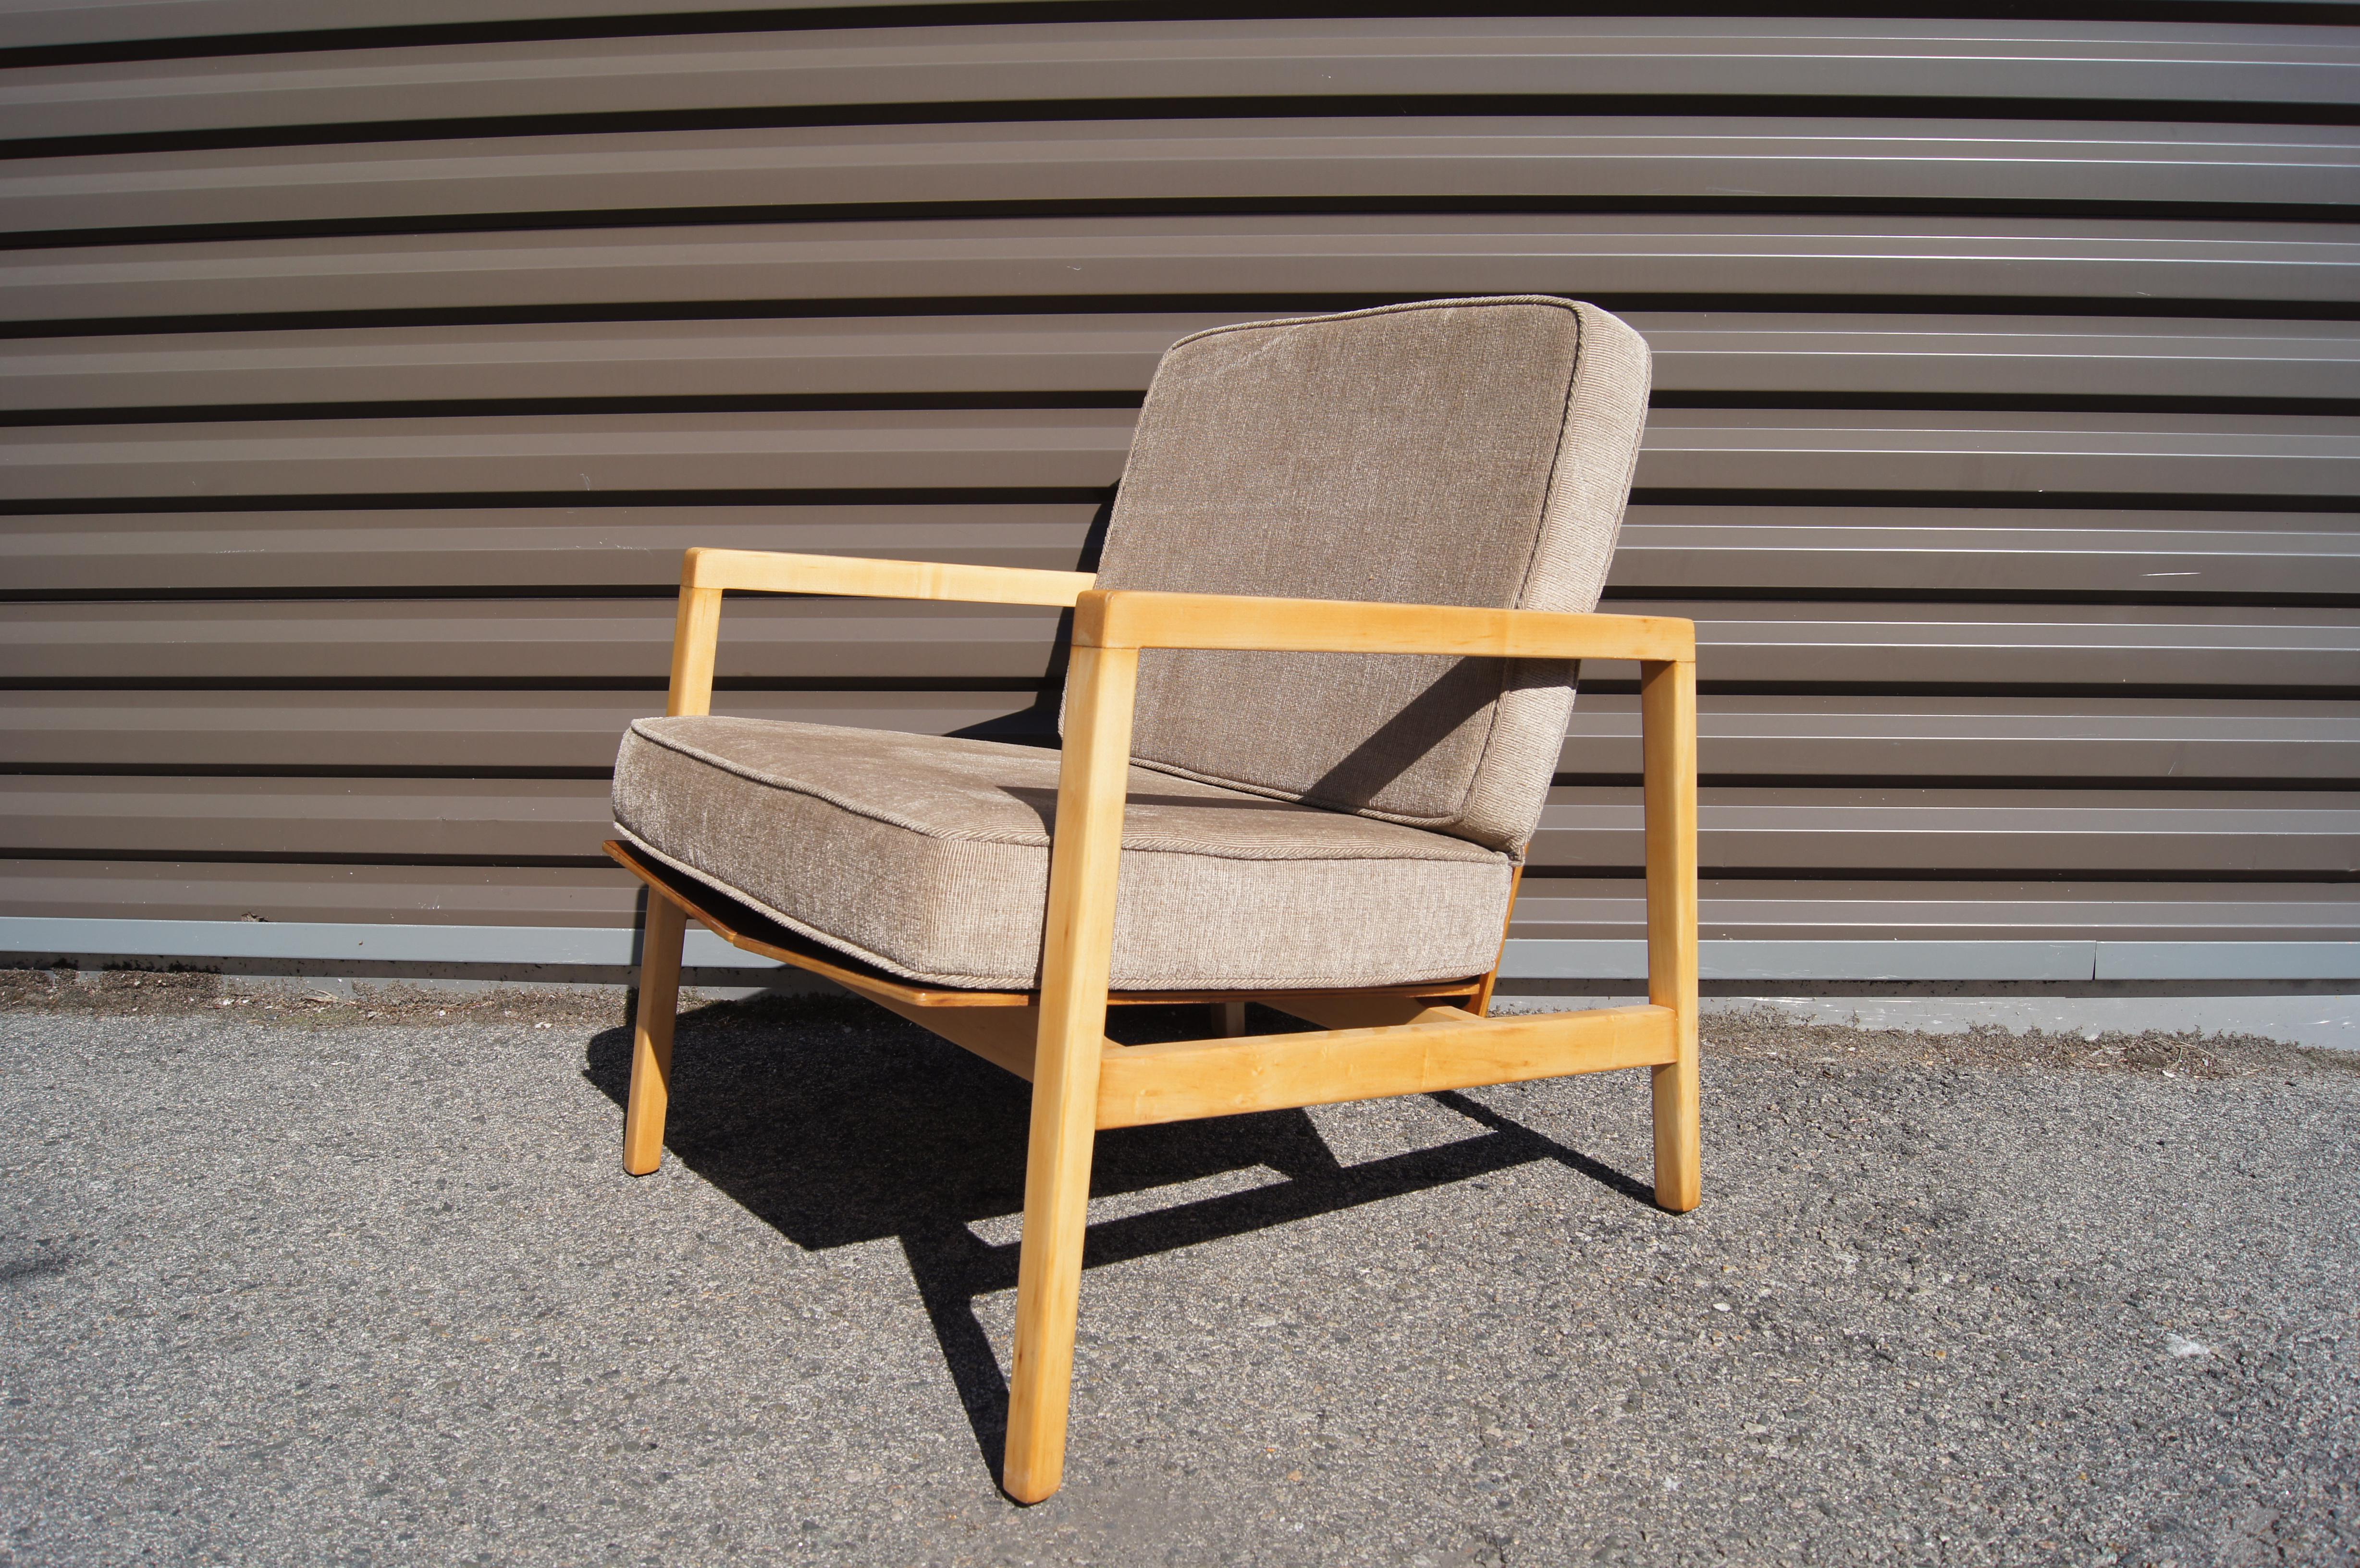 Created in 1955 by Lewis Butler, senior designer and later head of Knoll’s Planning Unit, this lounge chair, model 645, features a dynamic but clean-lined frame of maple into which are set angled planks of walnut plywood to form the seat and